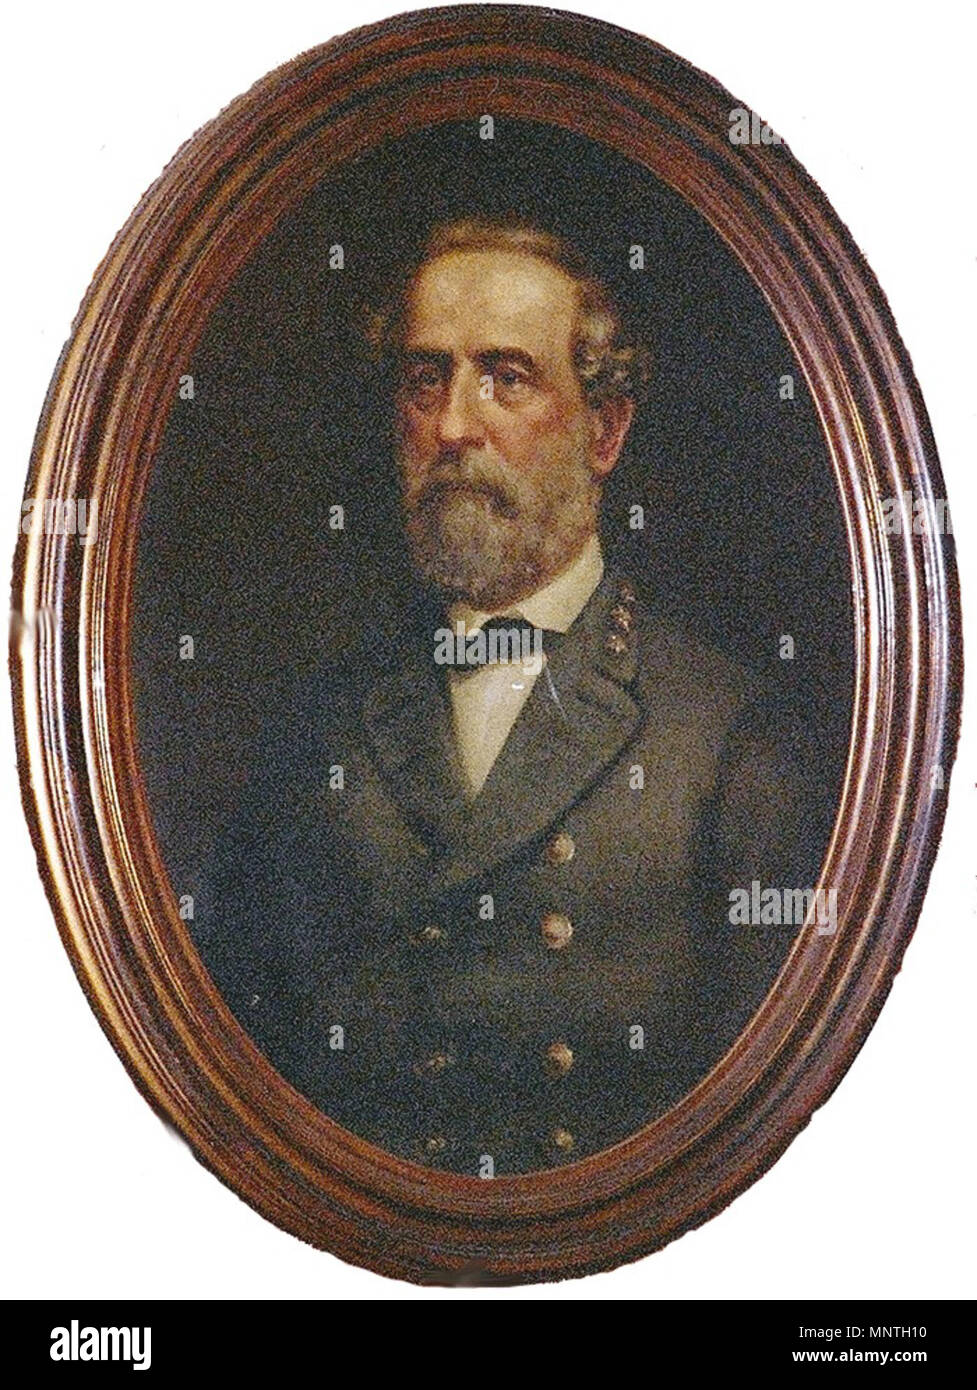 . Half-length oval portrait of Robert E. Lee, ad viv del, wearing double-breasted gray coat with turned down collar. Coat shows three single stars on collar. Subject wears a white shirt and black bow tie. Supposedly painted from life by Dury in 1865. Black background. Oil on Canvas, 27 x 21. Private Collection. Tennesee Portrait Project, Portrait #1804 . circa 1865.   George Dury  (1817–1894)     Alternative names Friedrich Julius George Dury; George W. Dury  Description American painter  Date of birth/death 15 May 1817 1894  Location of birth/death Würzburg Nashville  Authority control  : Q50 Stock Photo